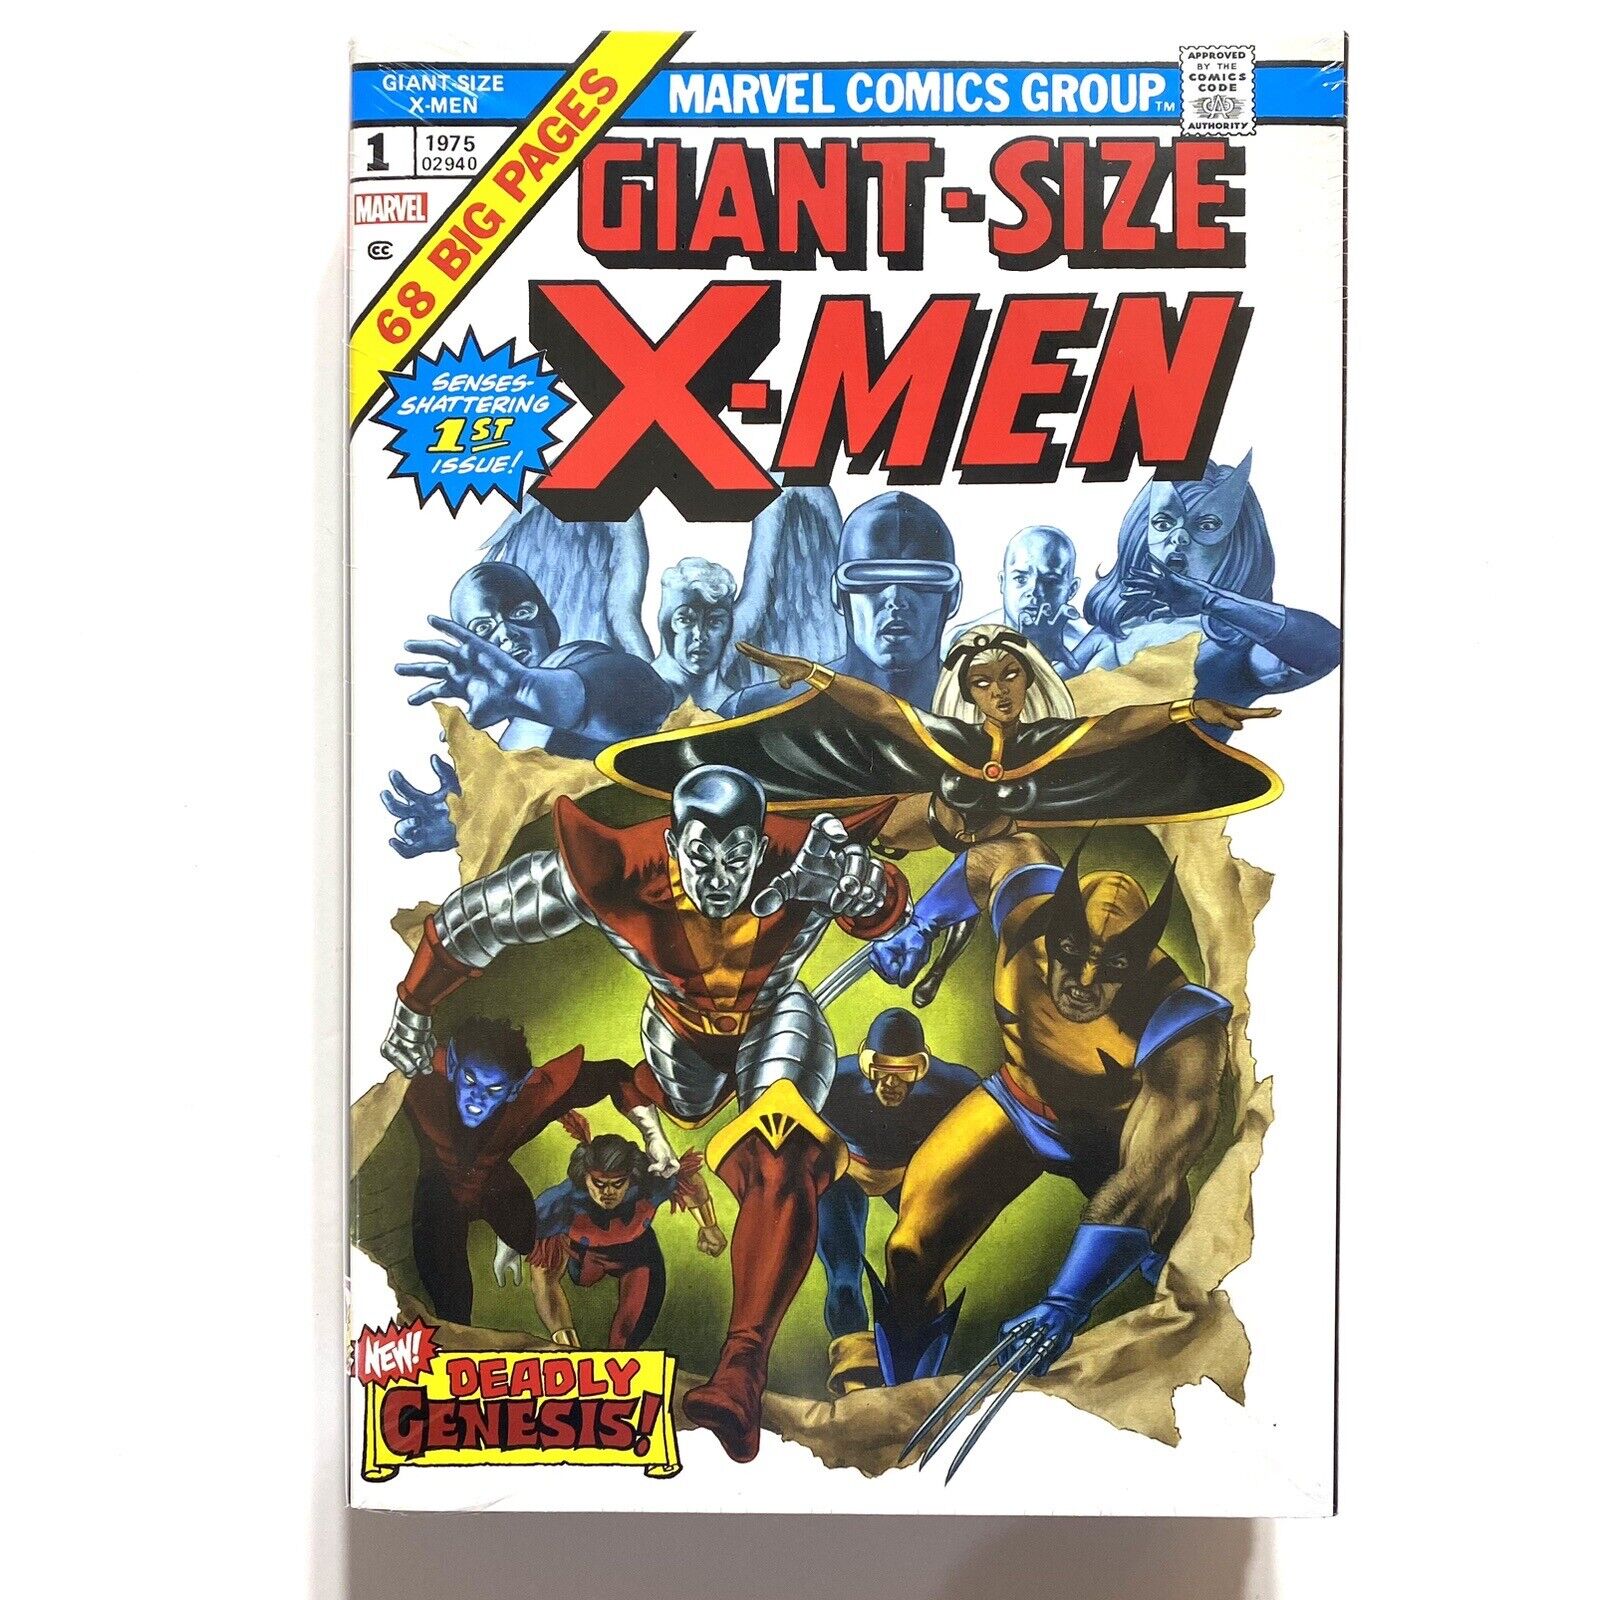 The Uncanny X-Men Omnibus Vol 1 DM Variant New Sealed $5 Flat Combined Shipping